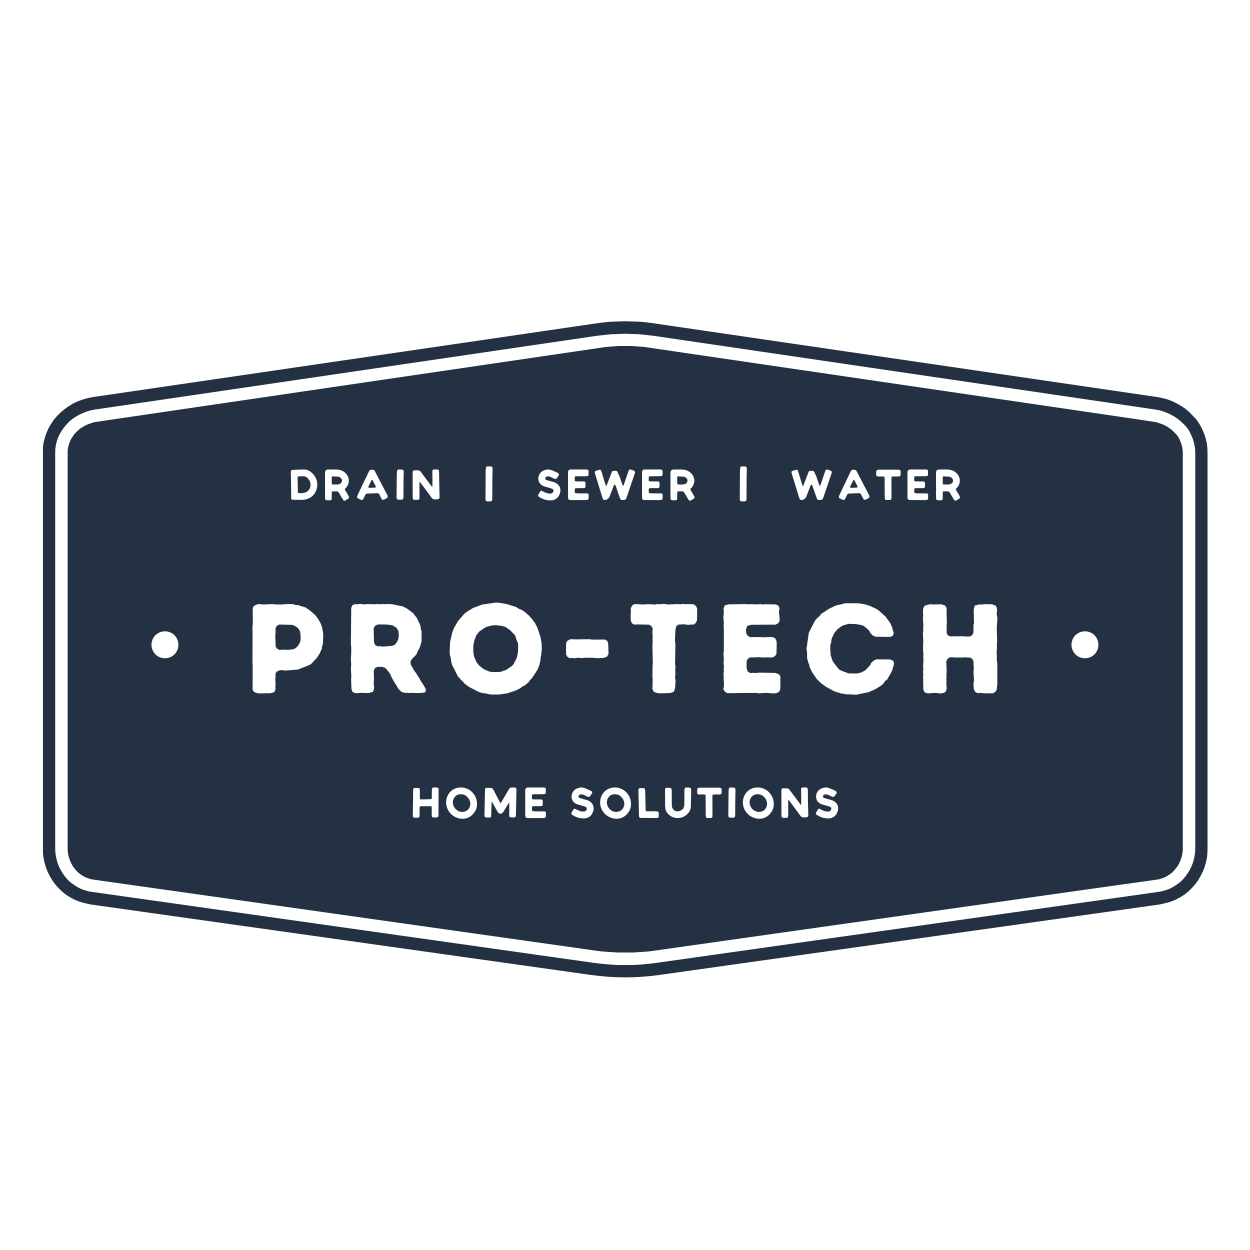 Pro-Tech Home Solutions